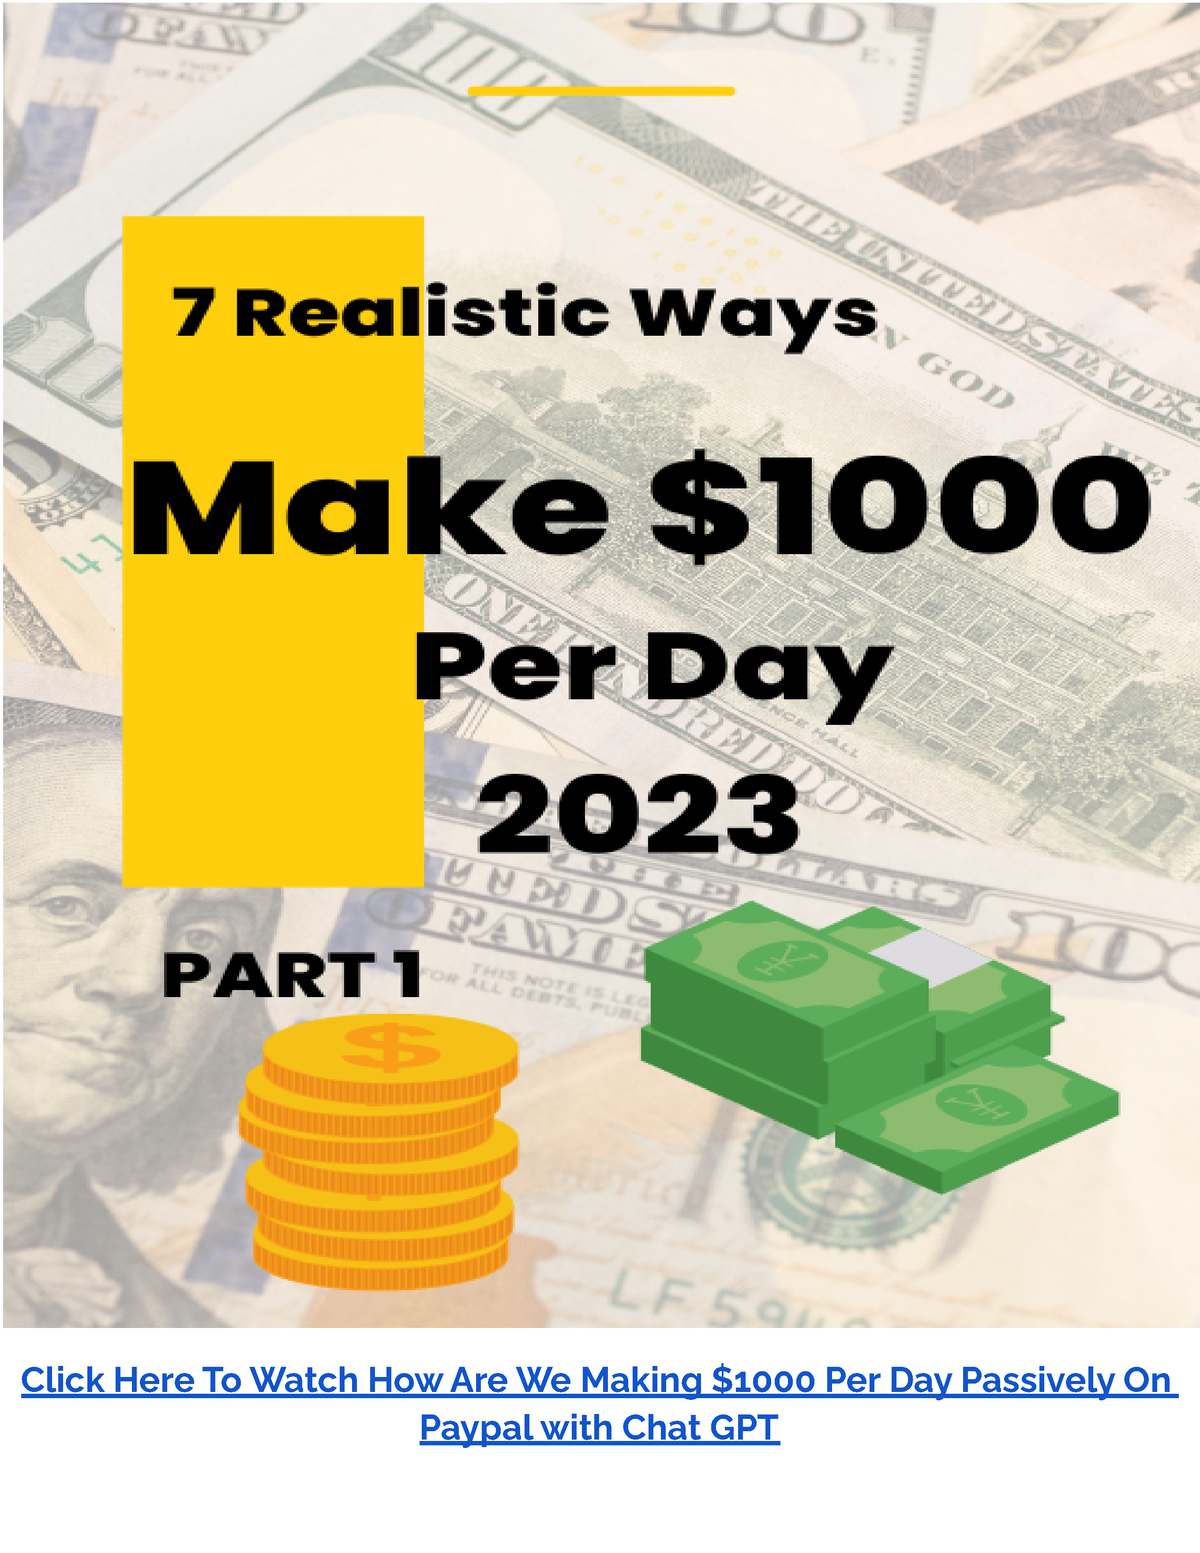 Top 15 Ways to Make $1000 in 24 Hours (Realistic & Doable